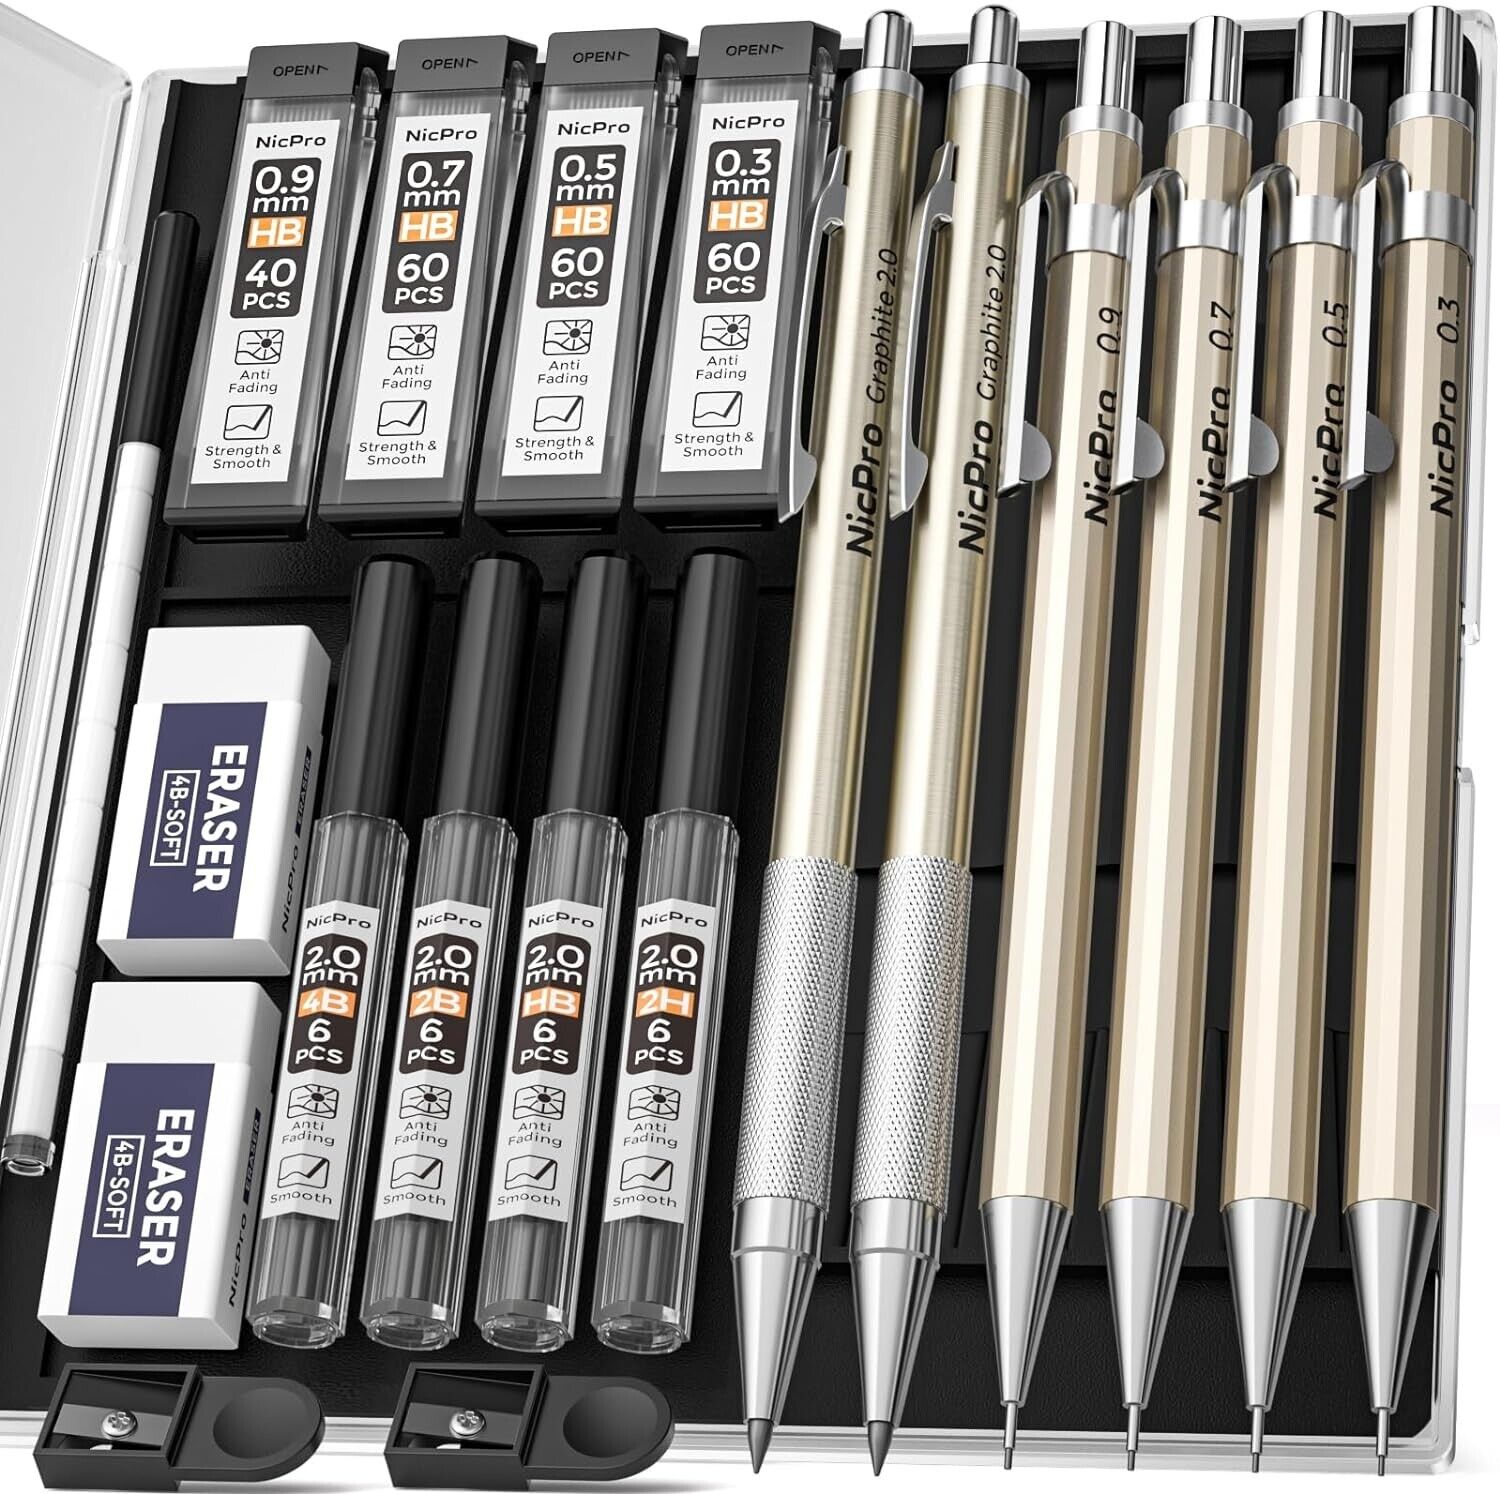 New Nicpro 6 PCS Metal Mechanical Pencil Set in Case, Artist Drafting Pencils